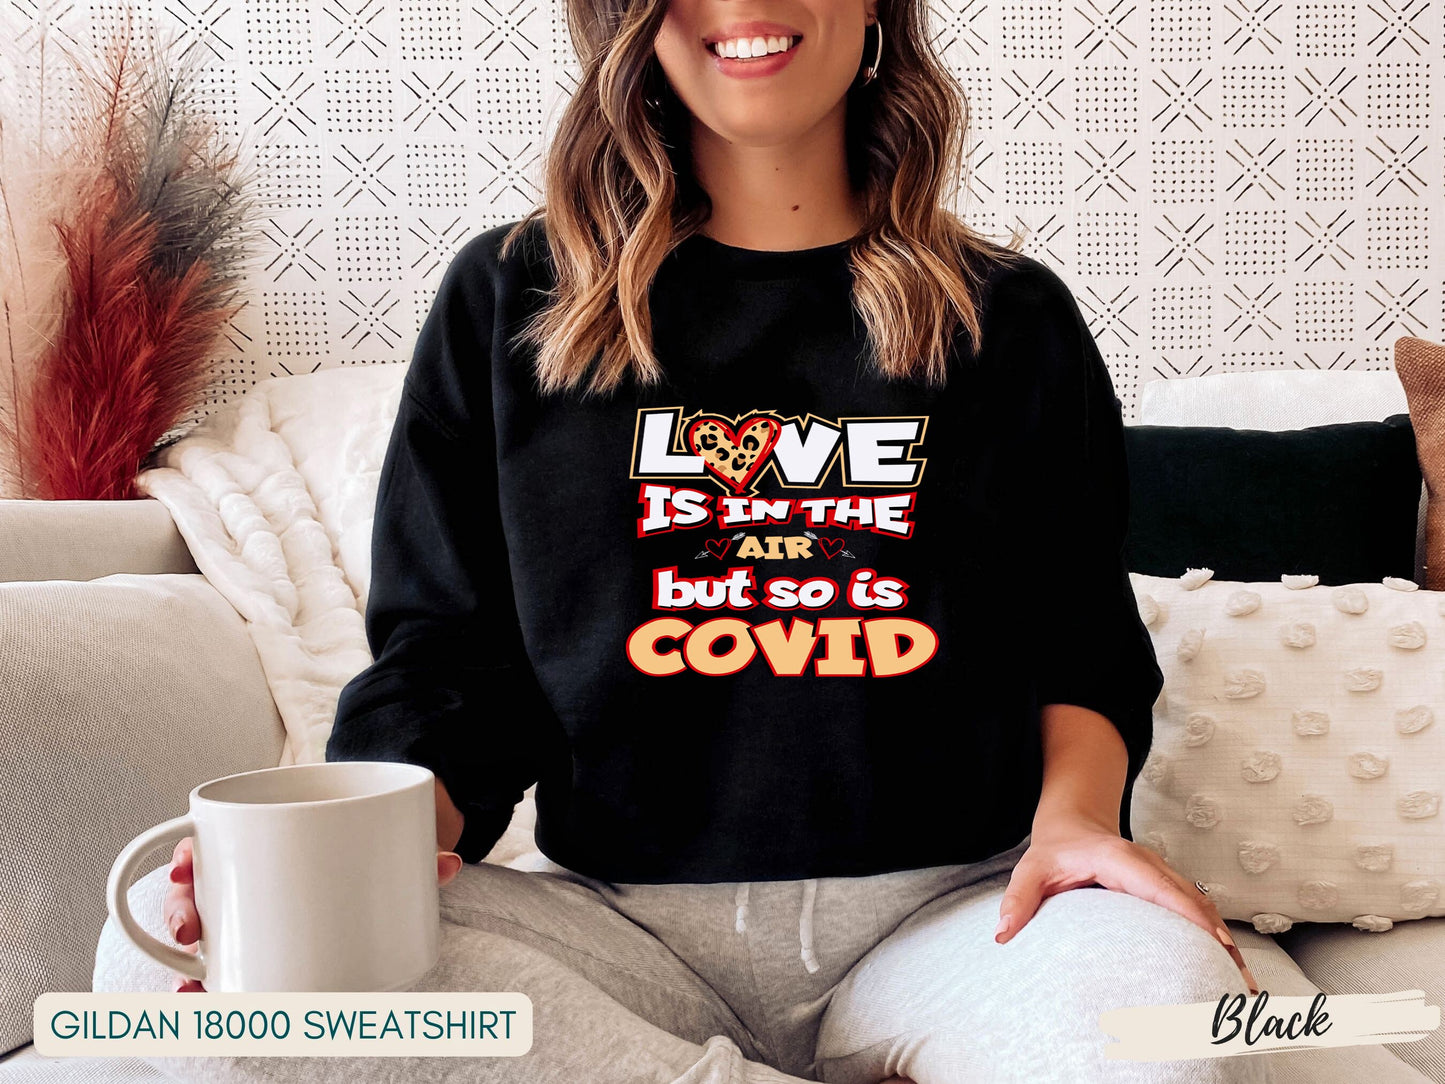 Funny Valentines Day Shirt, Love is in the Air But So is Covid Shirt, Long Sleeve, Short Sleeve Sweatshirt, Nurse Valentine Shirt - Mardonyx Sweatshirt